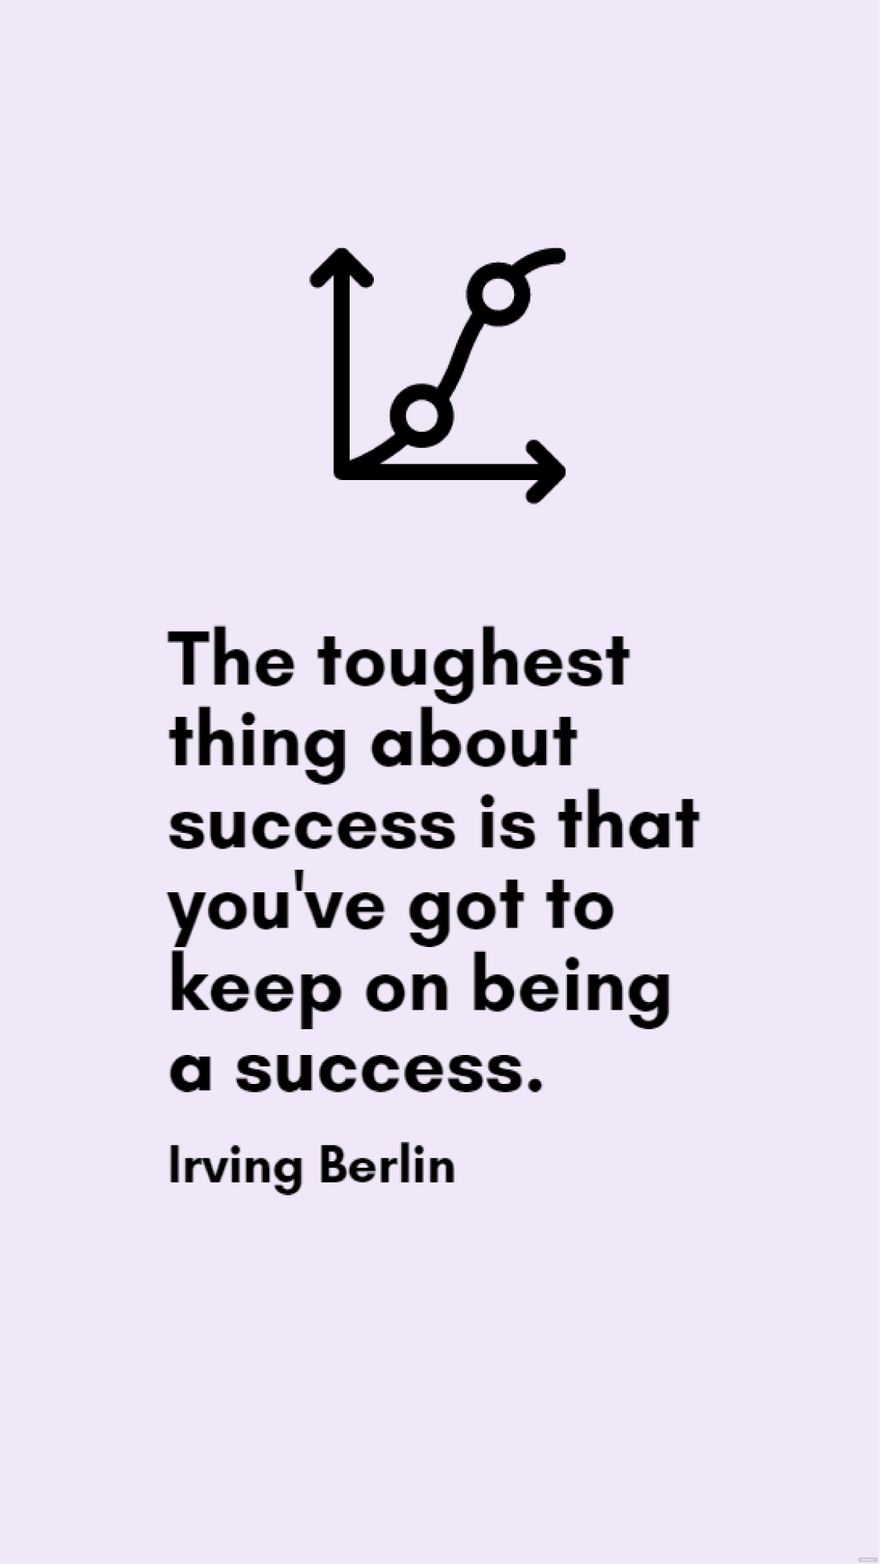 Irving Berlin - The toughest thing about success is that you've got to keep on being a success.